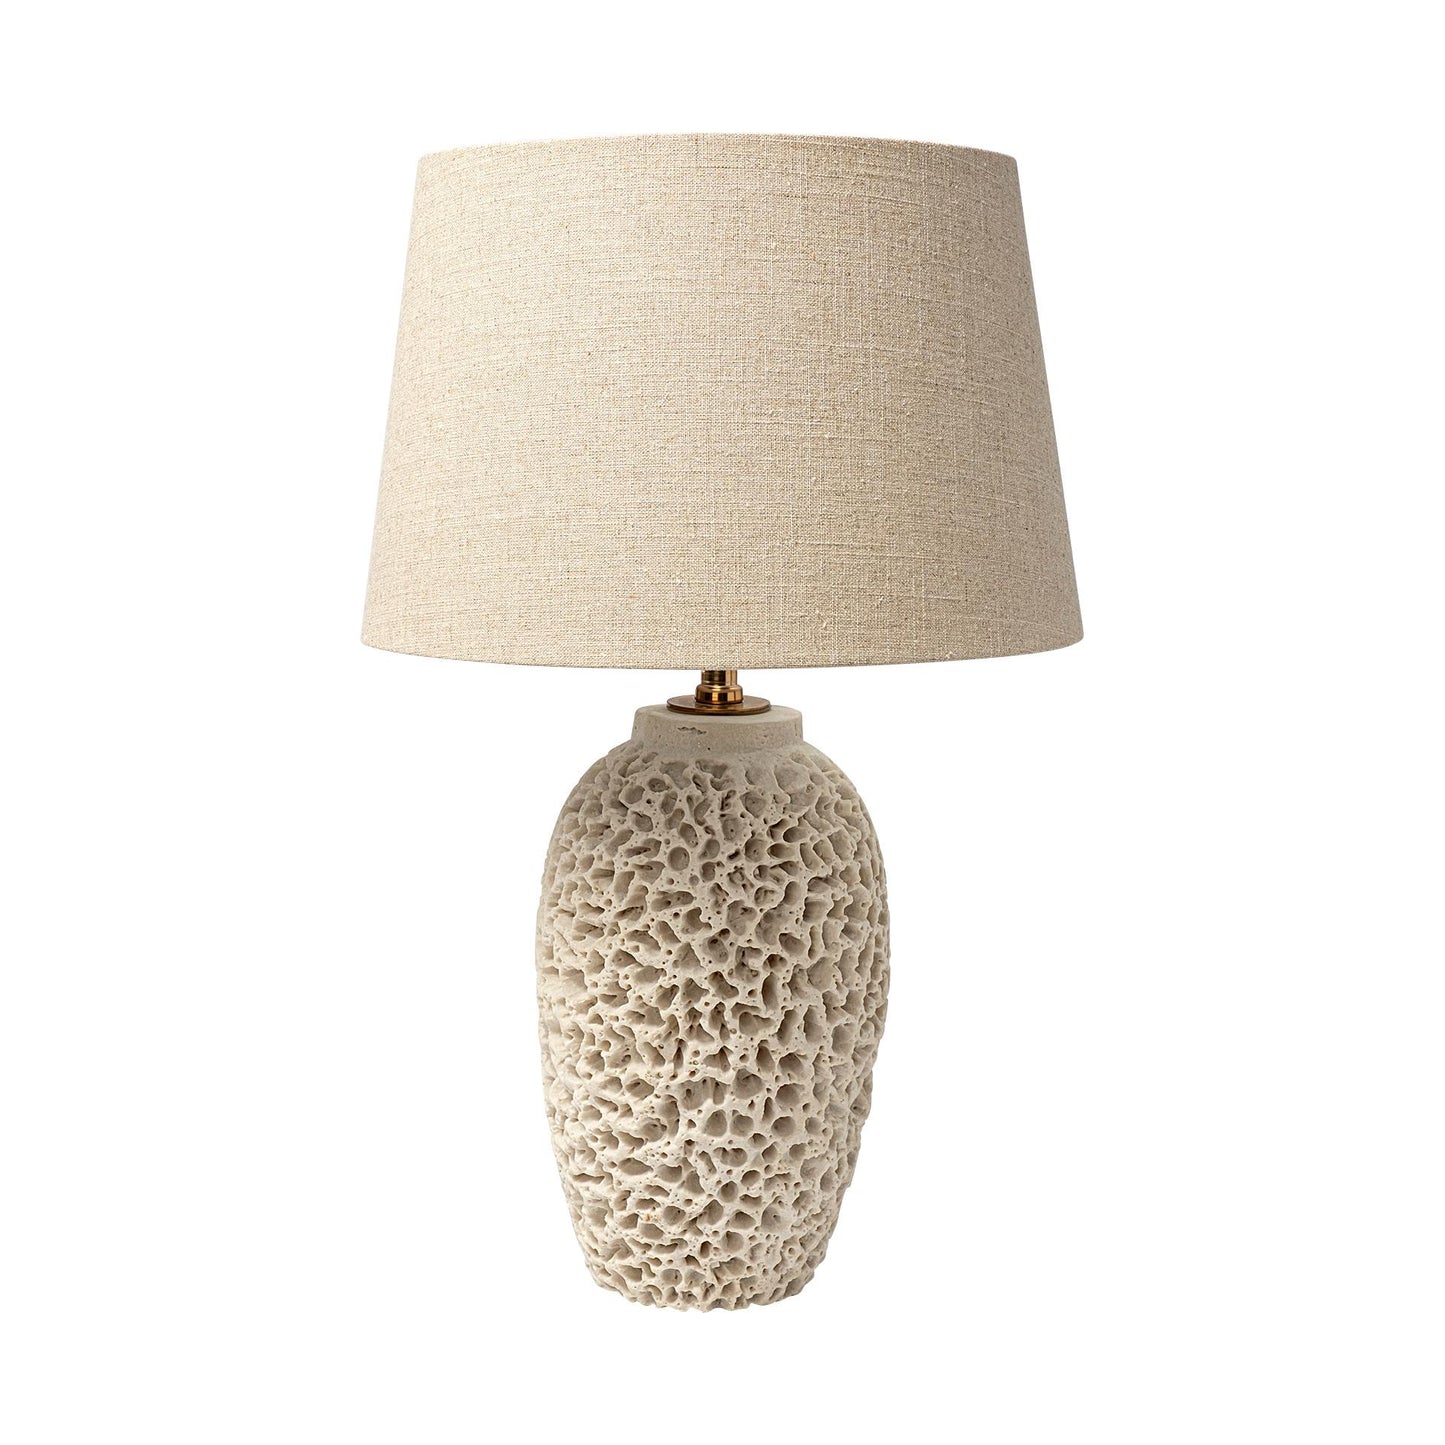 Mariam (26"H) Beige Coral-Inspired Base Table Lamp